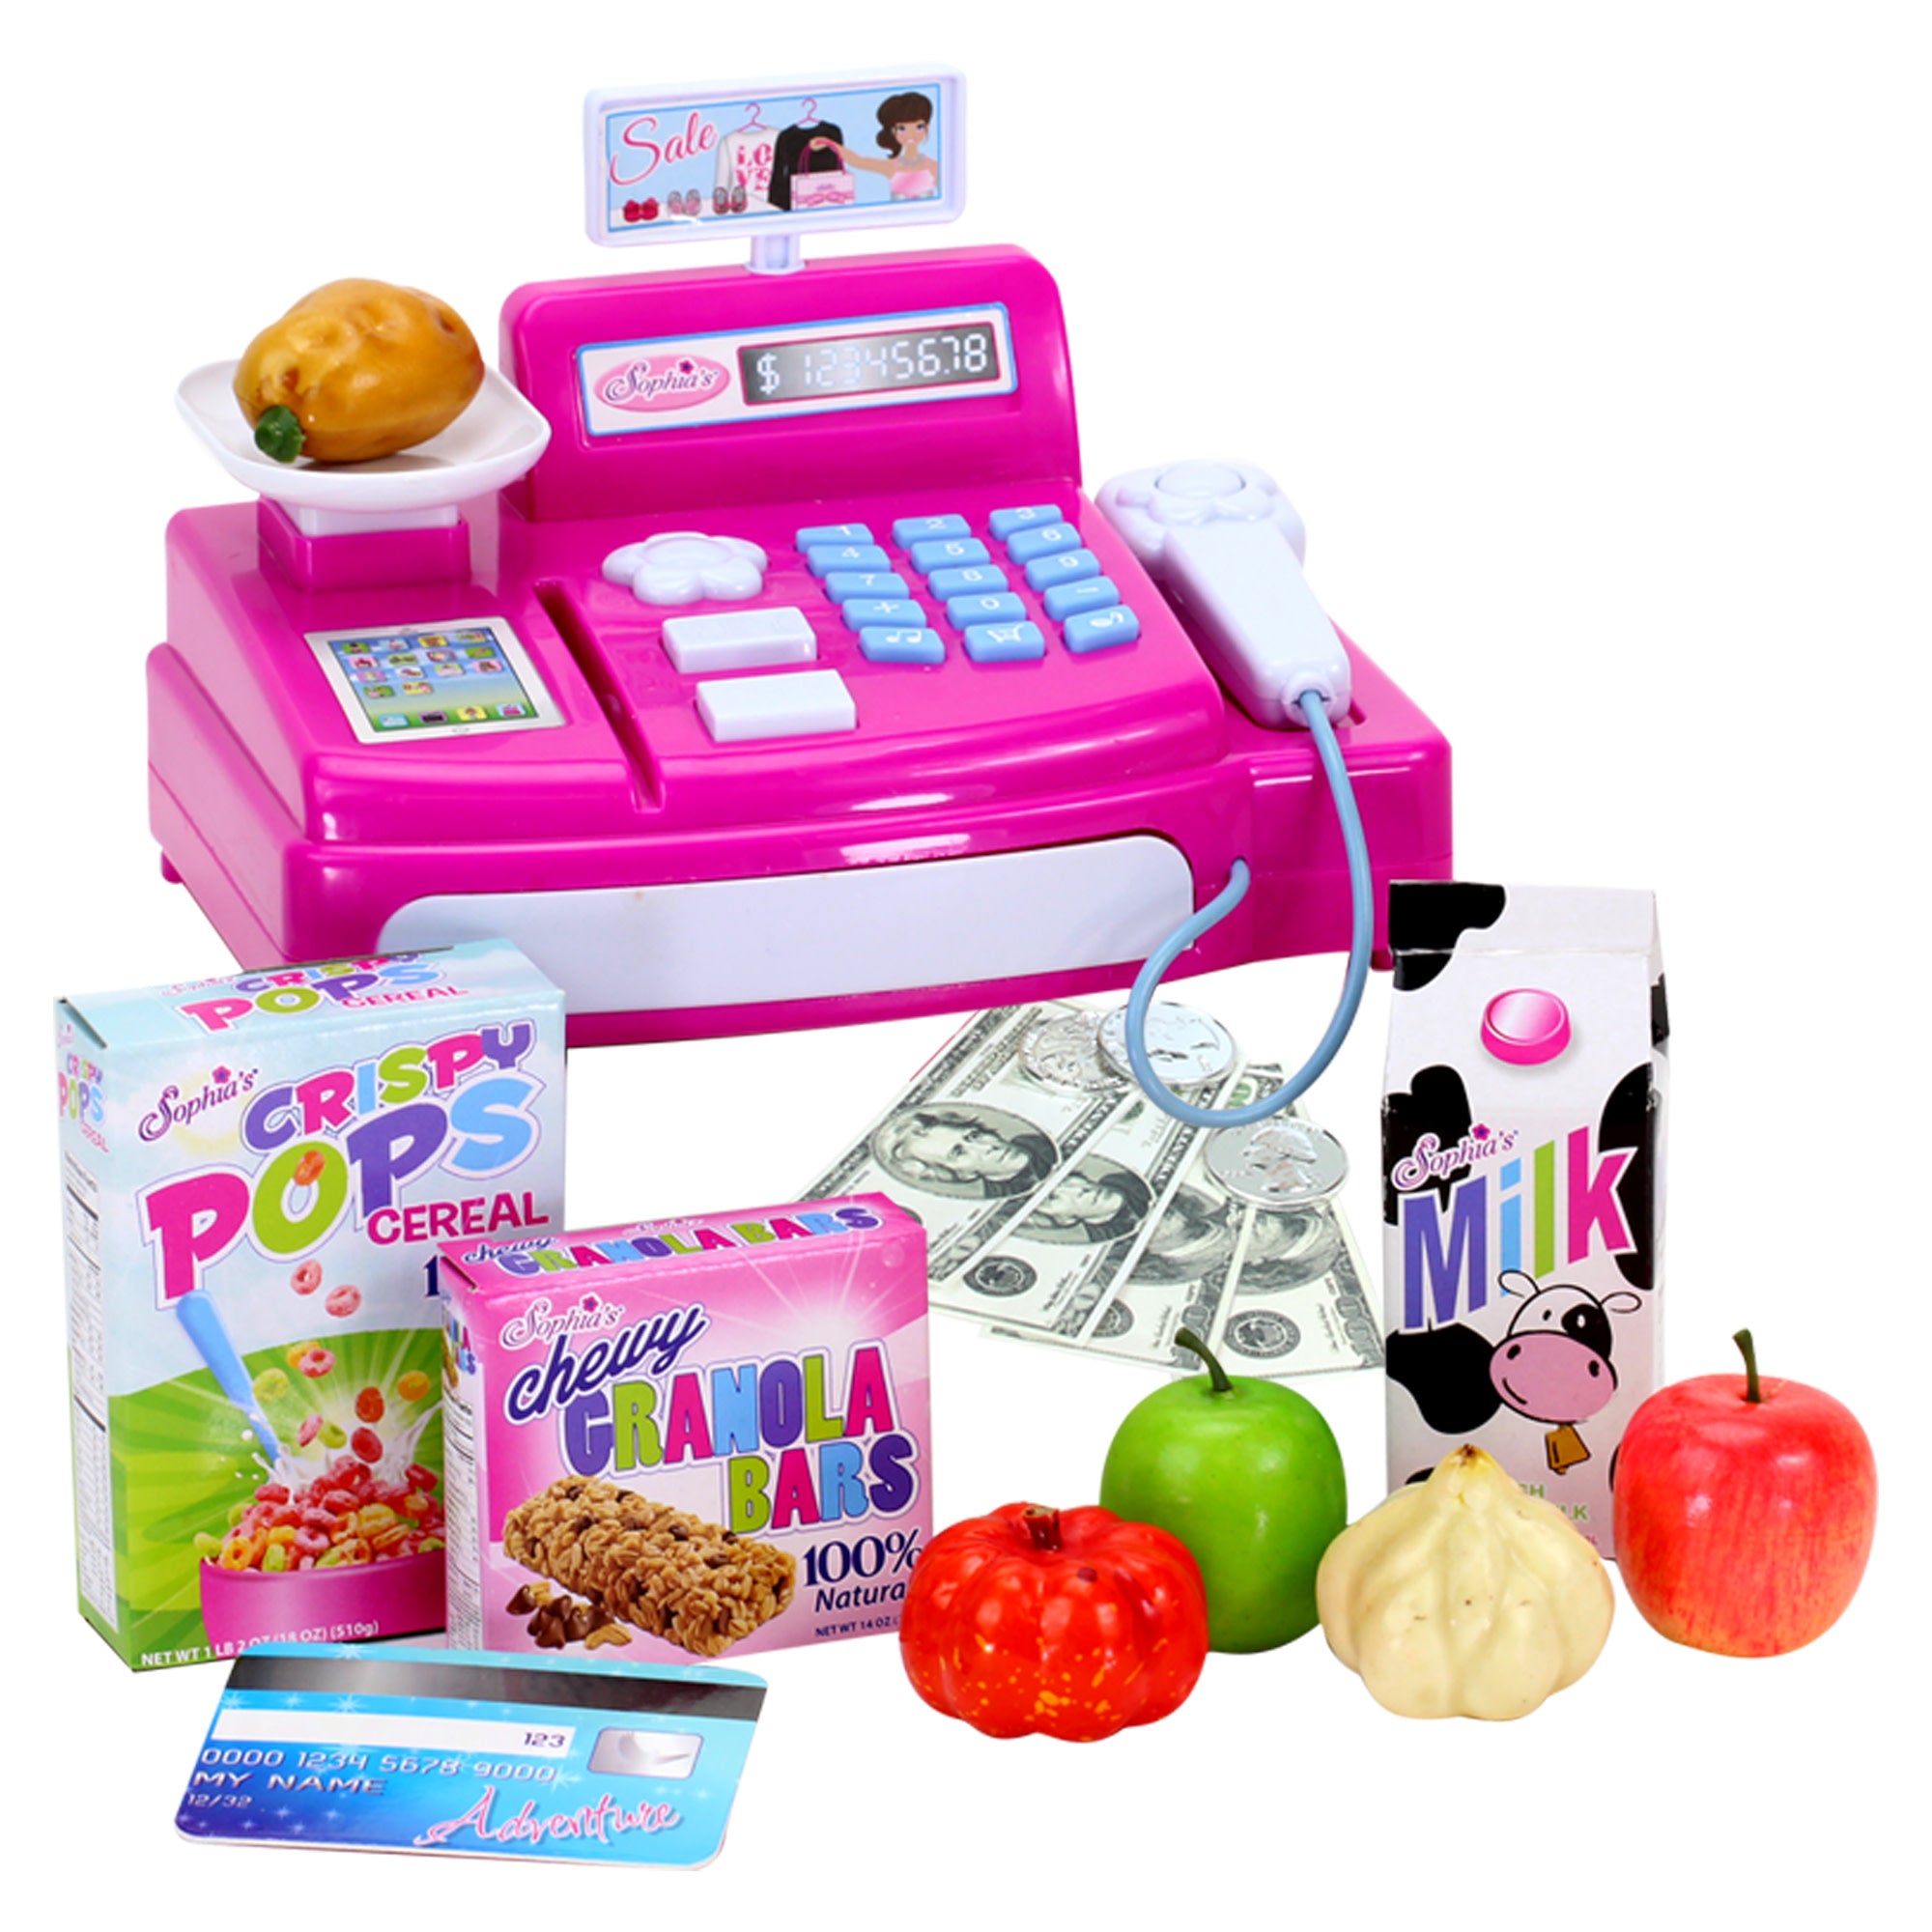 Sophia's Cash Register, Grocery Food, and Money Interactive Play Set for 18" Dolls, Hot Pink